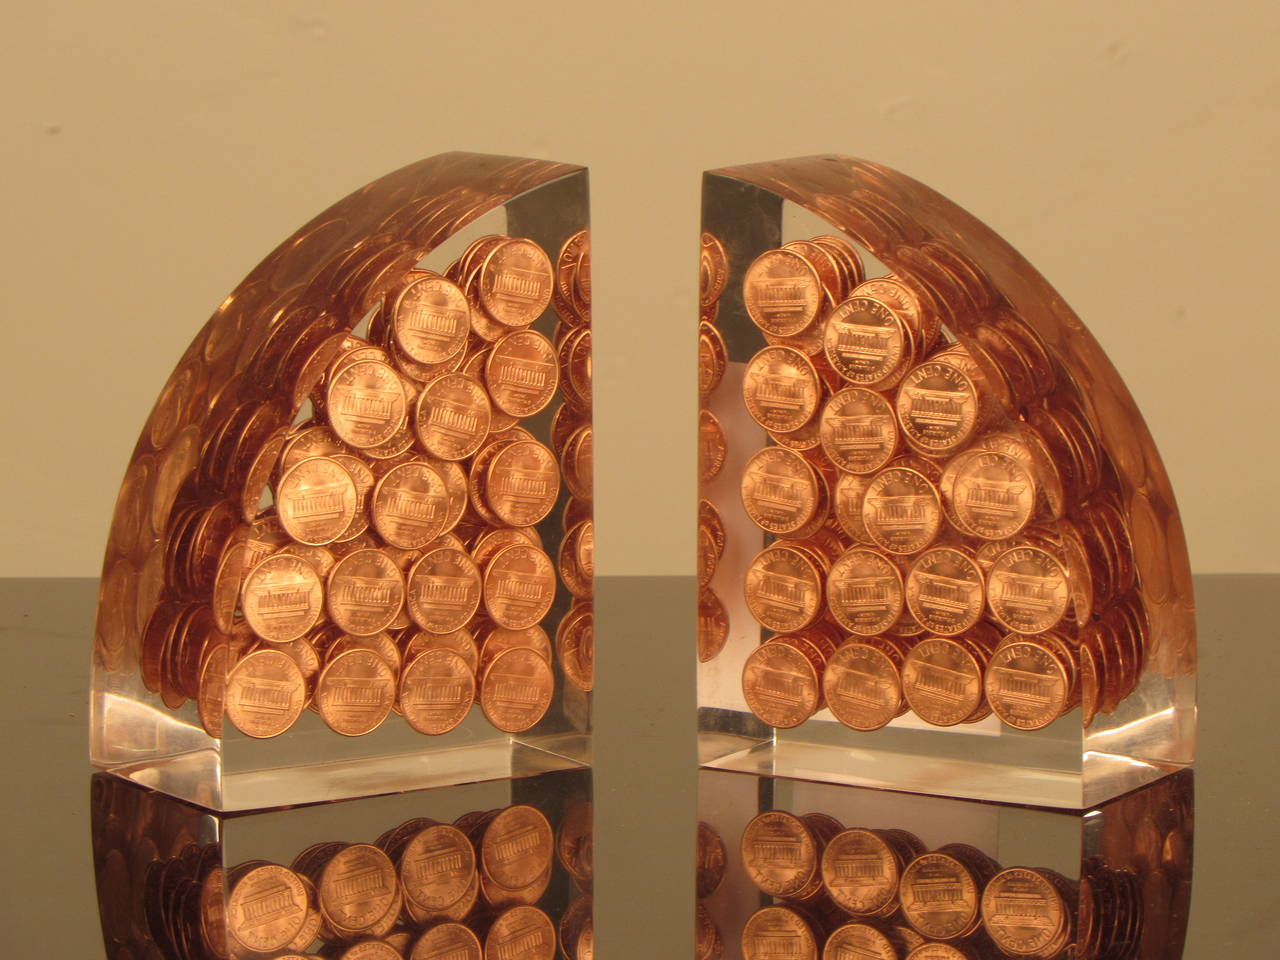 Fantastic pair of lucite and uncirculated pennies bookends in incredible condition. Unusual to find them in this demi-lune shape.

Lucite is shiny and clear and the 1988 coins are mint.